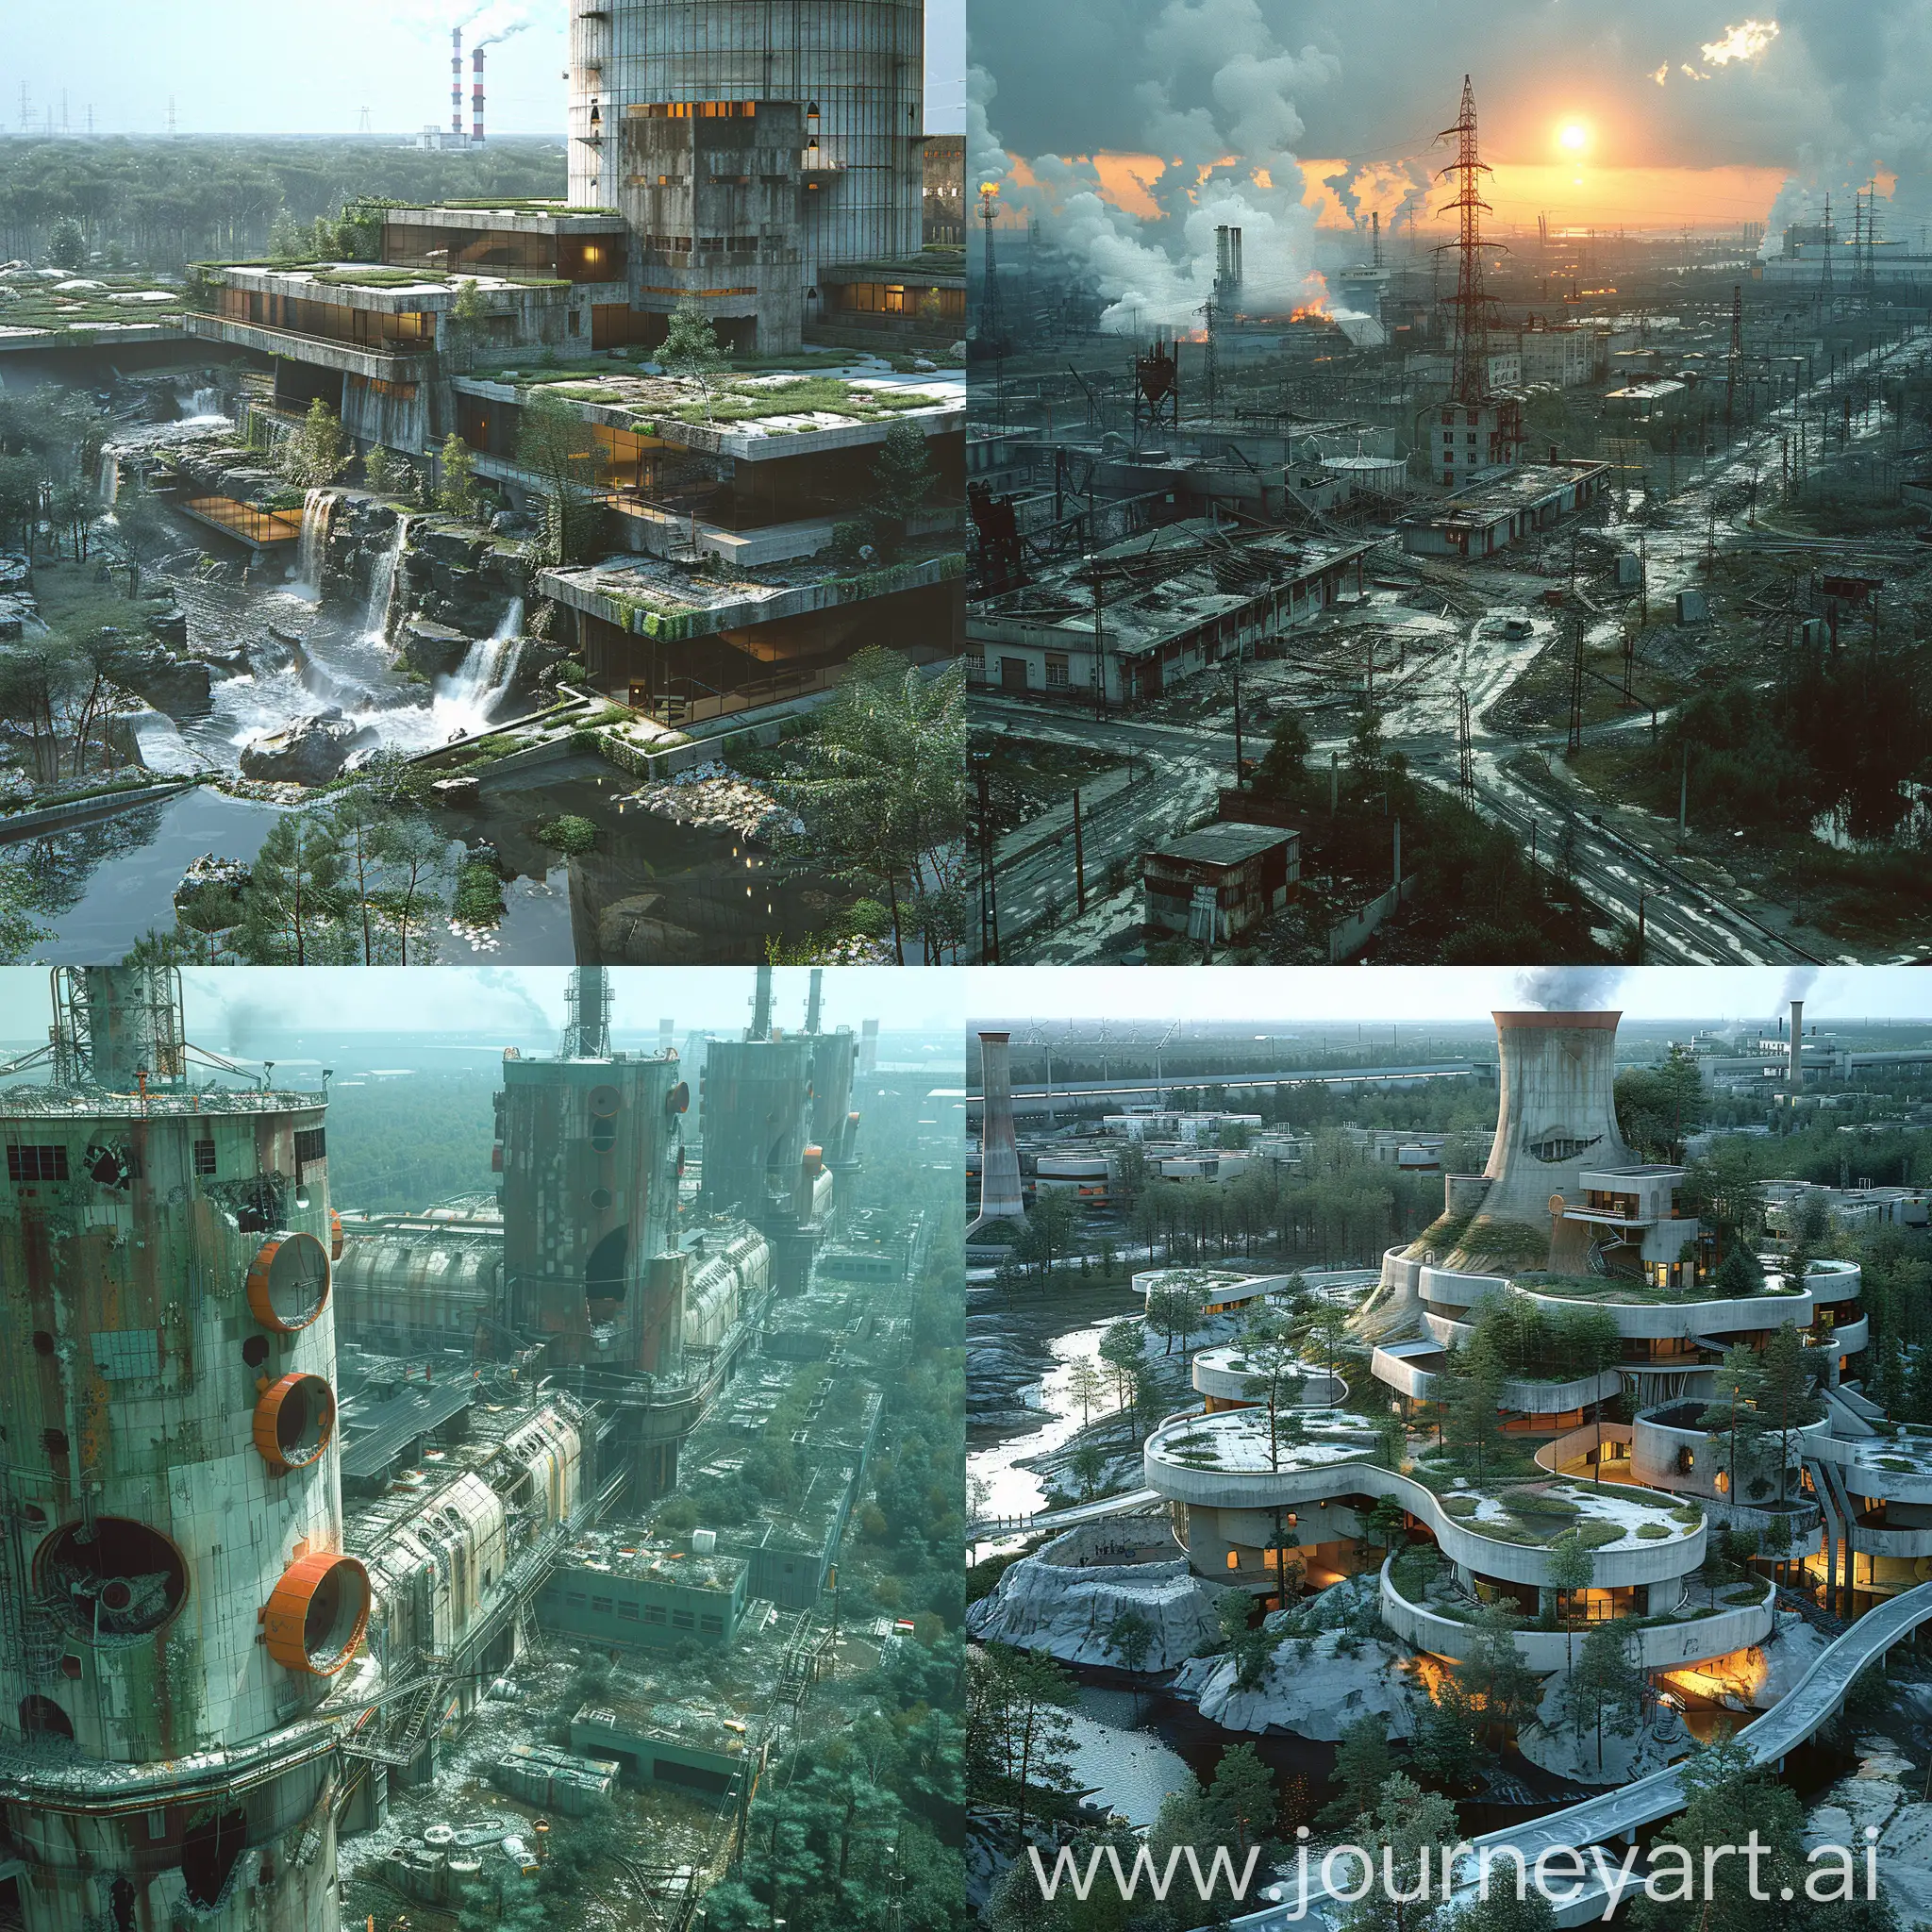 Futuristic-Chernobyl-Advanced-Renewable-Energy-and-Sustainable-Infrastructure